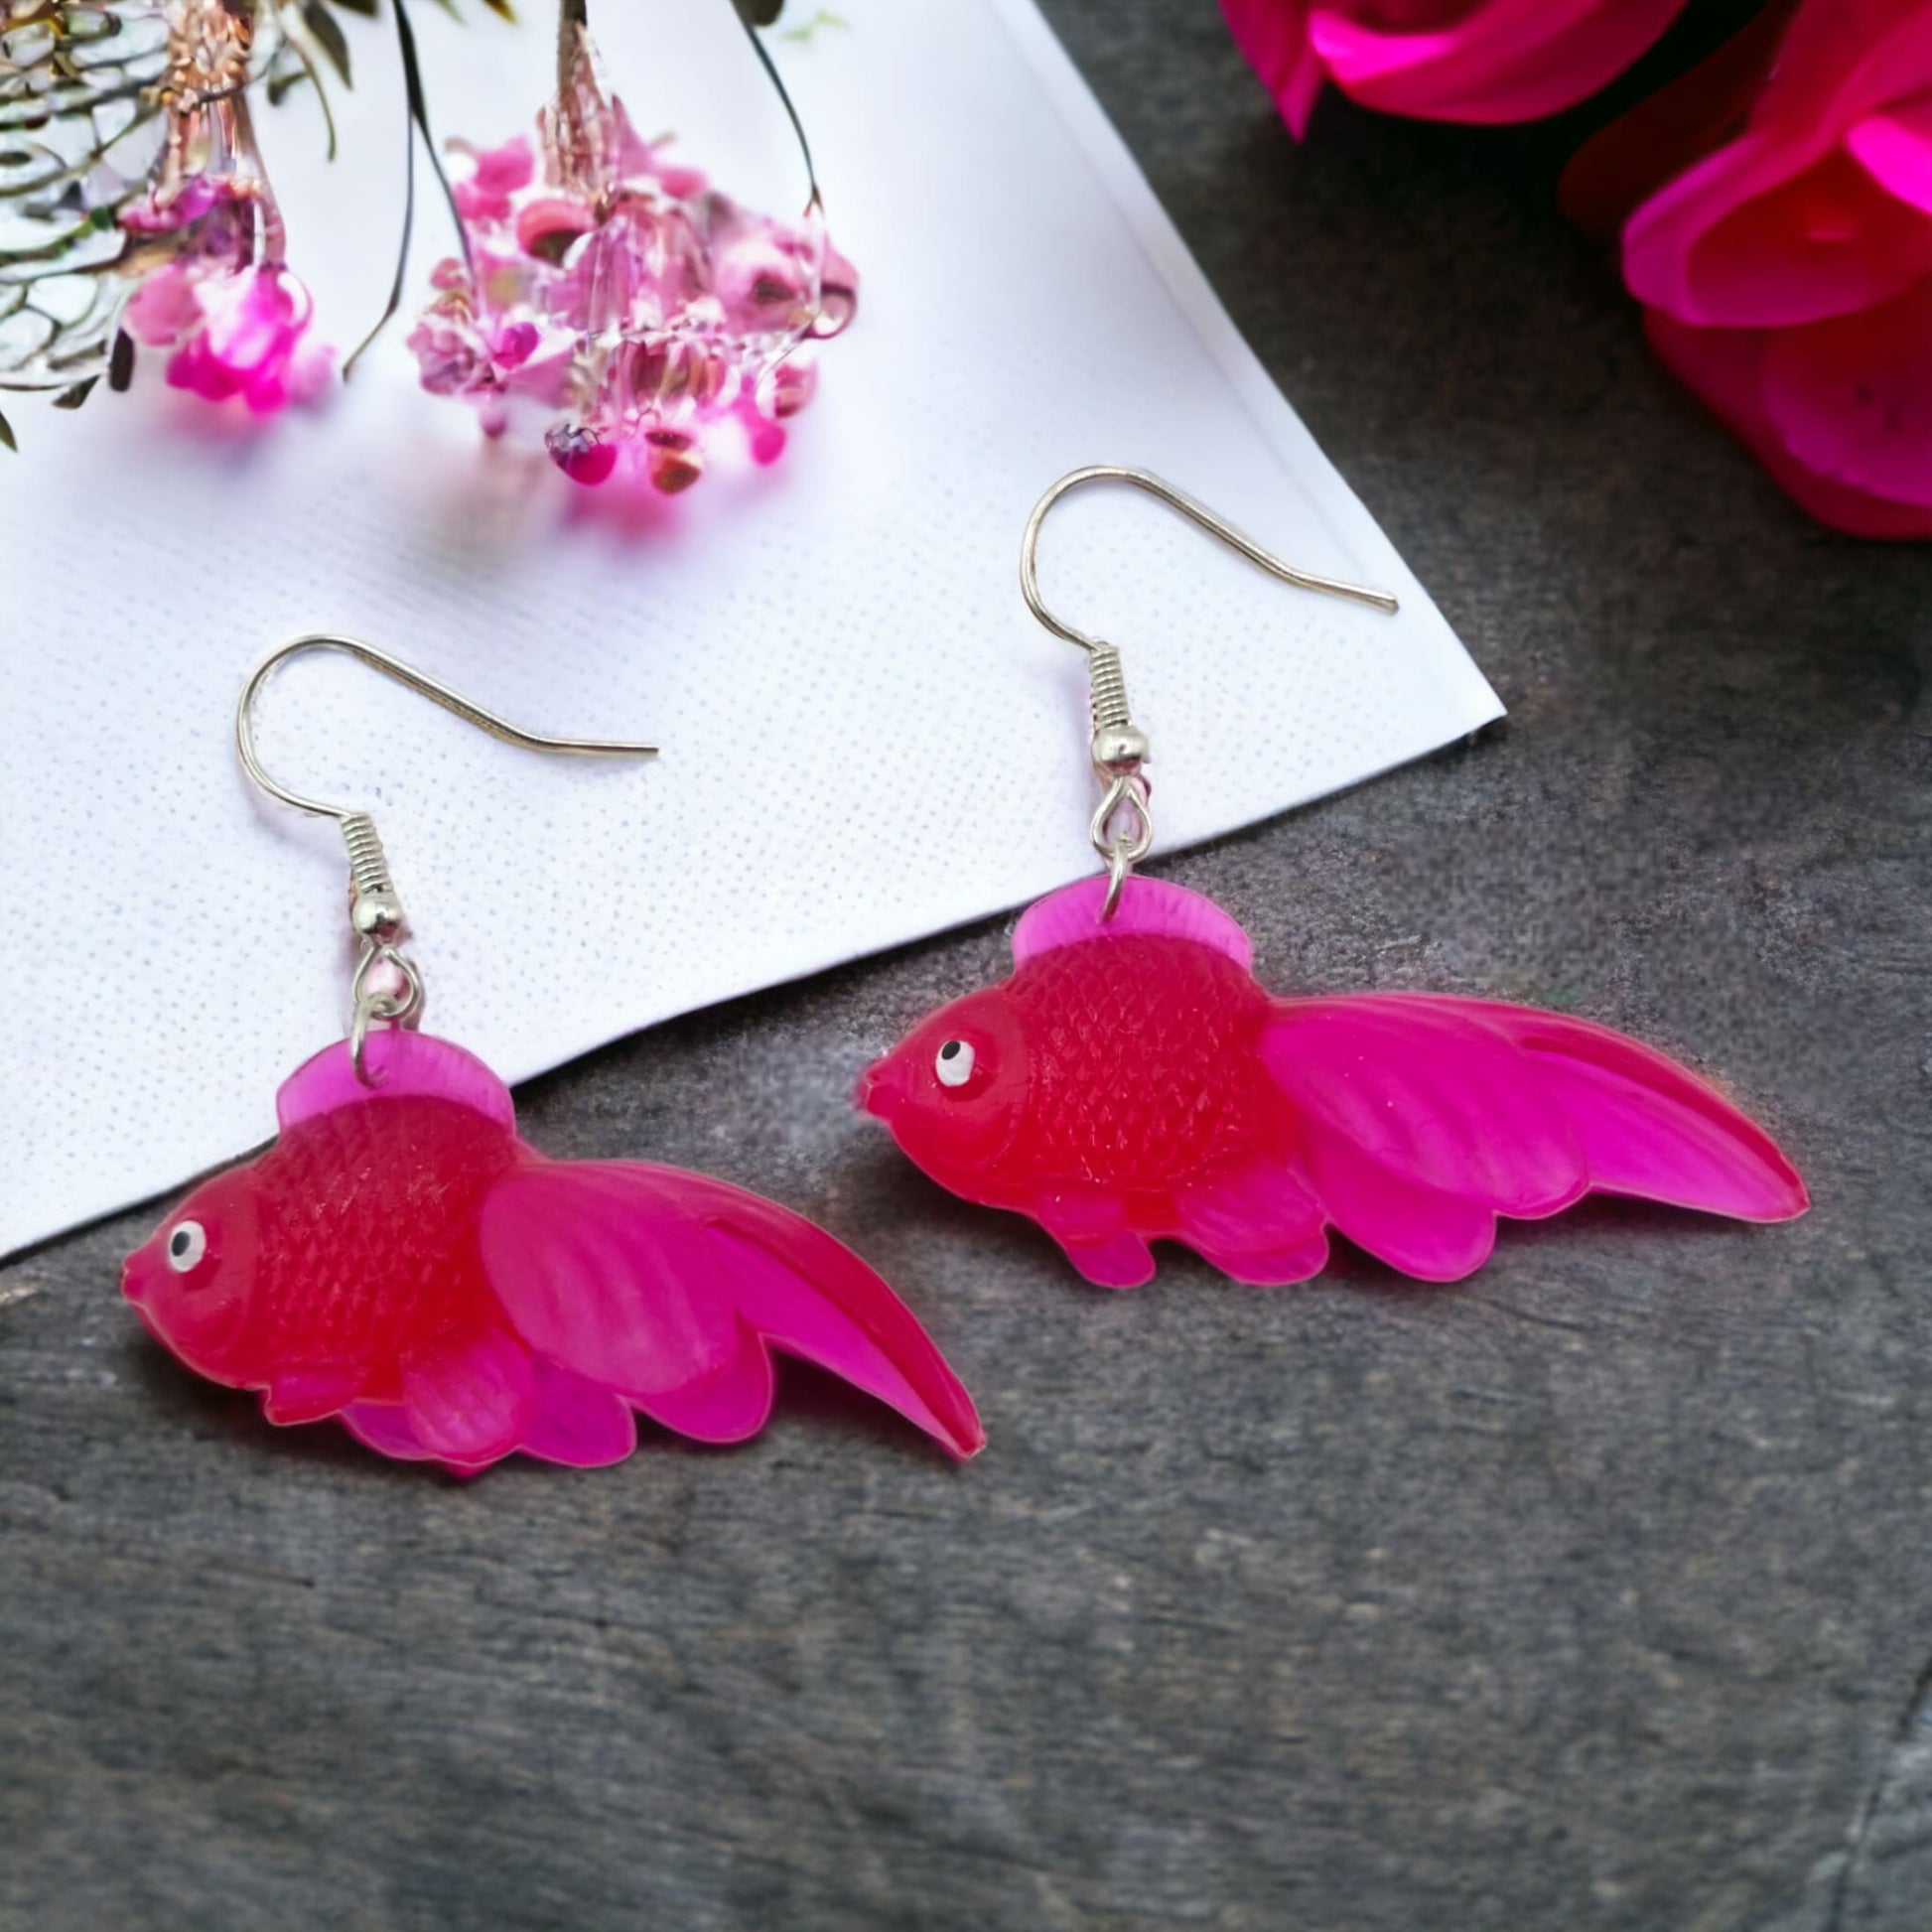 Funny Vibrant Fish Earrings from Confetti Kitty, Only 7.99